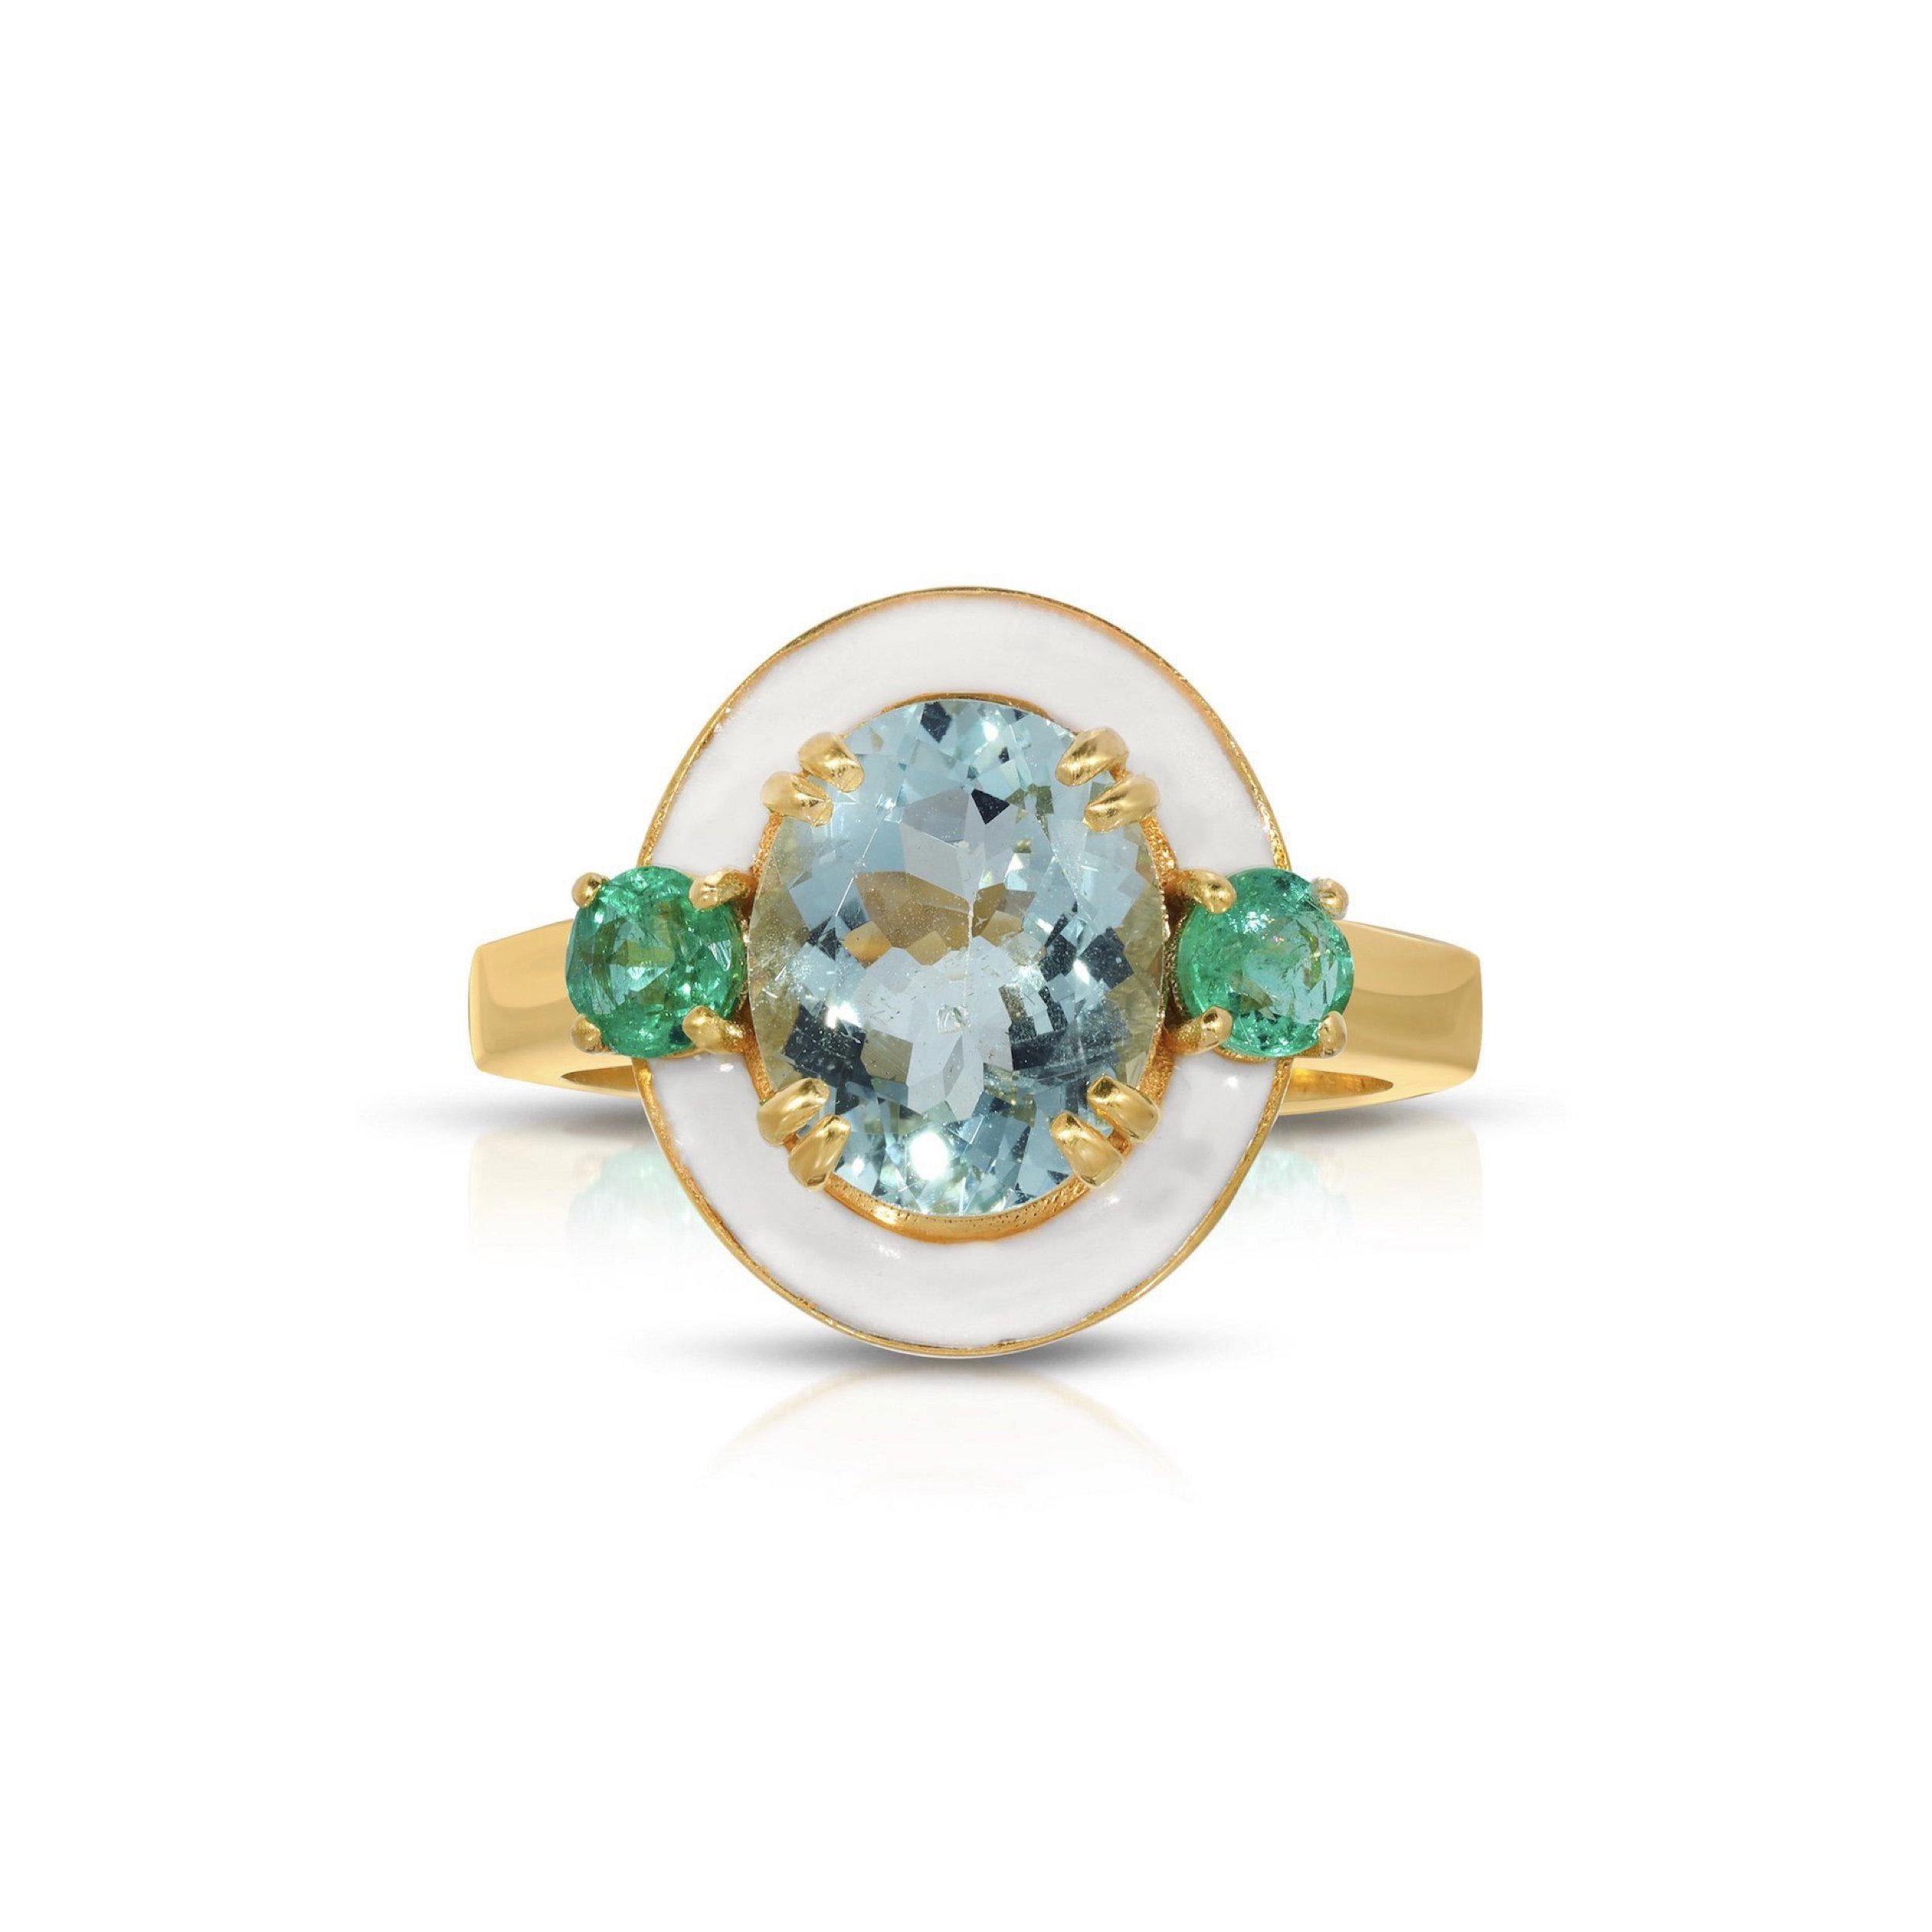 A beautiful cocktail ring of modern design with a mix of gorgeous gemstones and enamel. This ring features a beautiful, oval cut Icy Blue Aquamarine center stone set with two round cut fiery Emeralds and glossy white enamel. This ring is set in